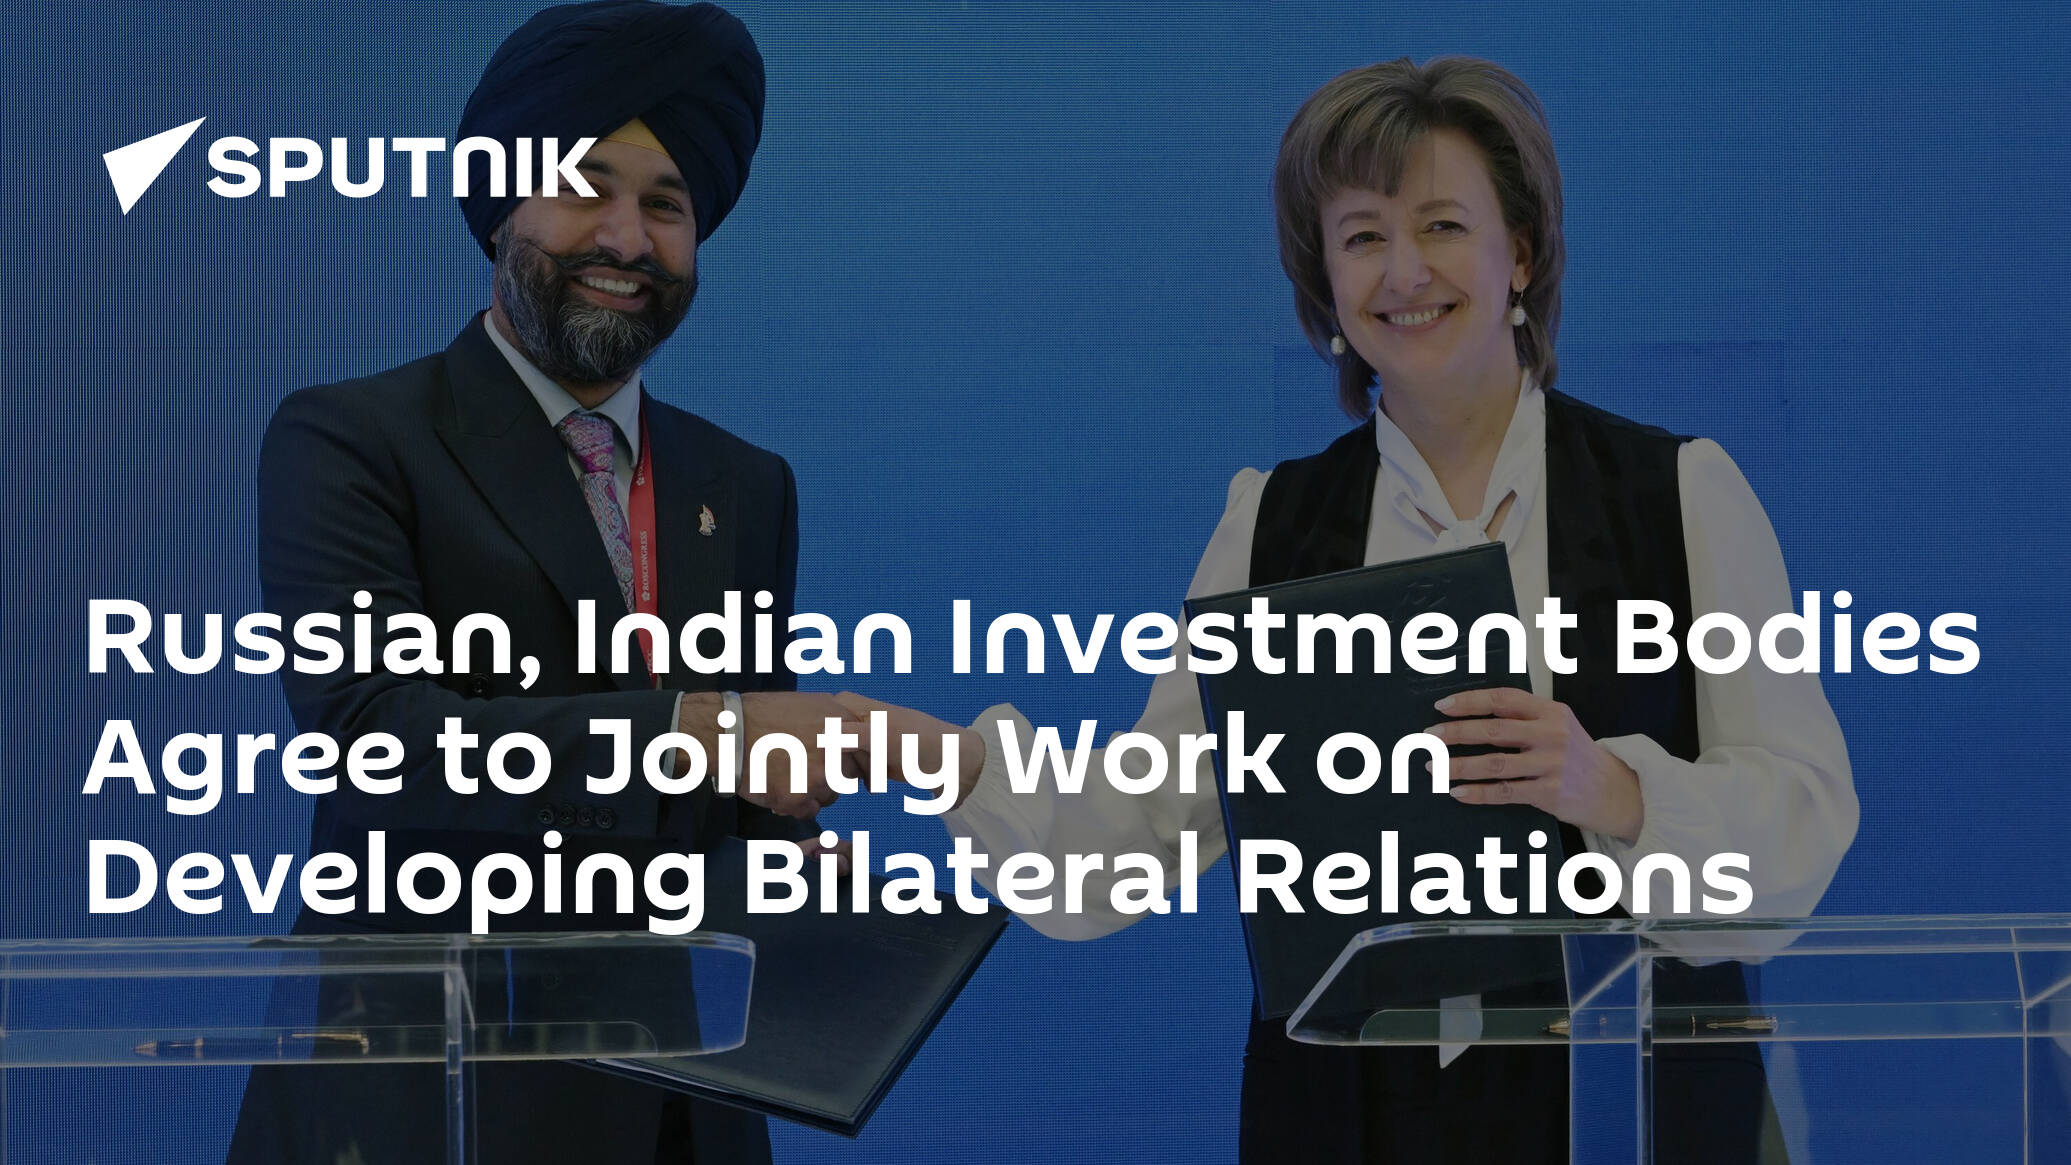 Russian, Indian Investment Bodies Agree to Jointly Work on Developing Bilateral Relations